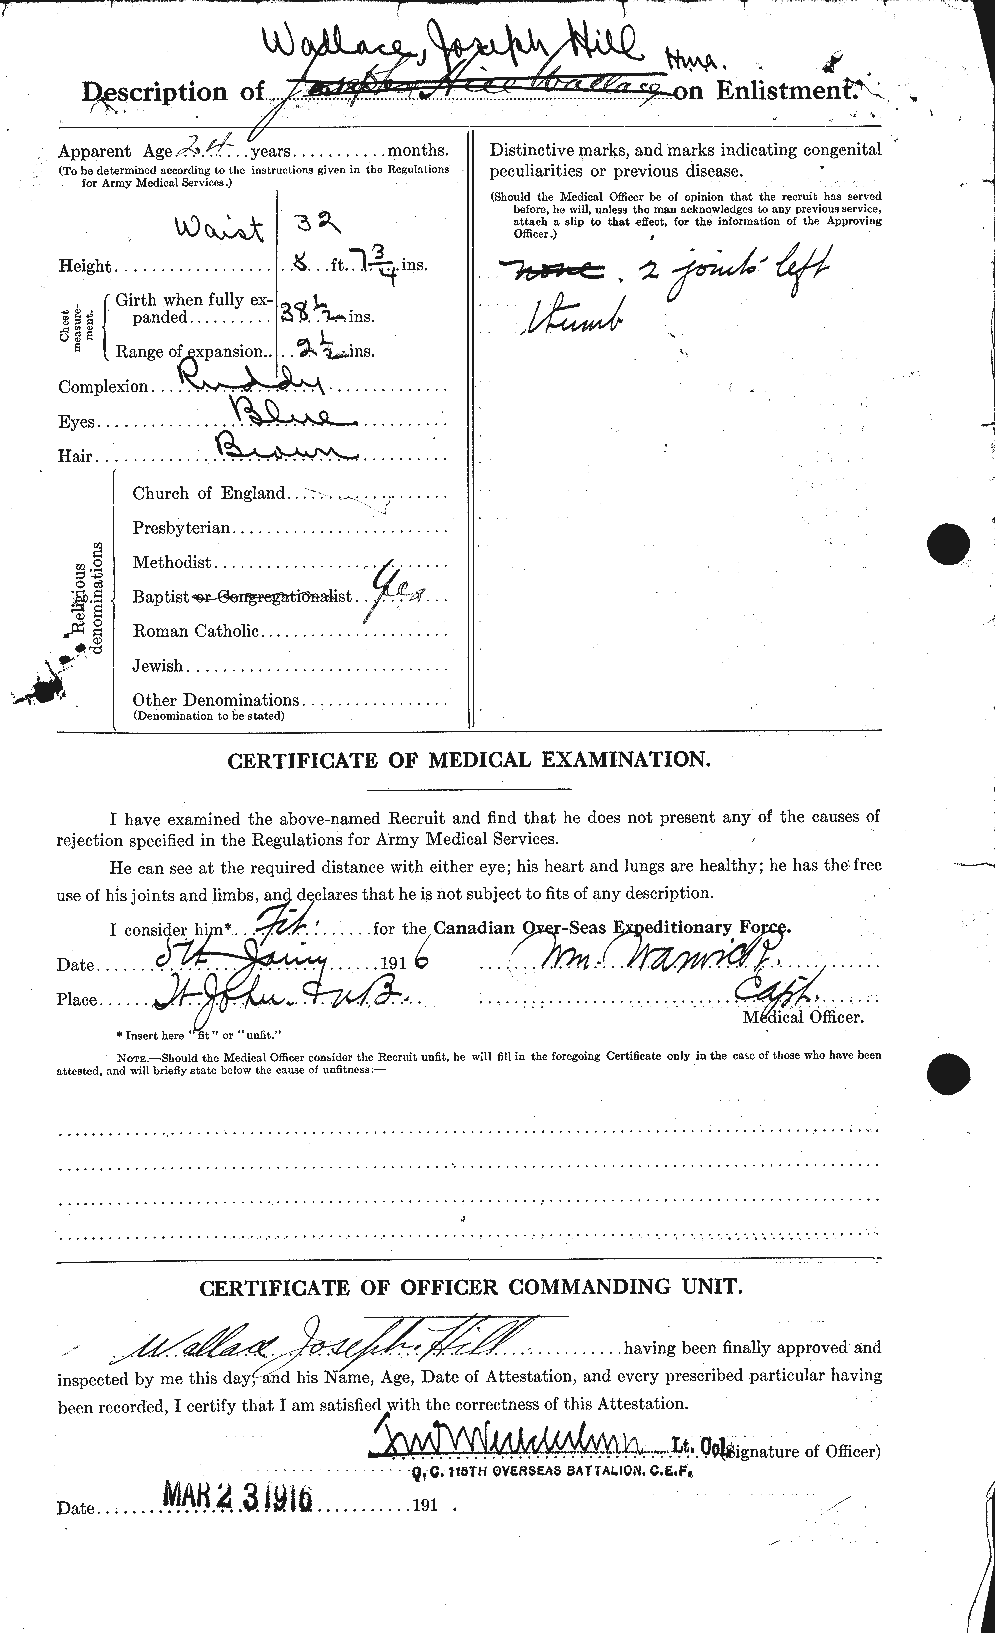 Personnel Records of the First World War - CEF 654659b